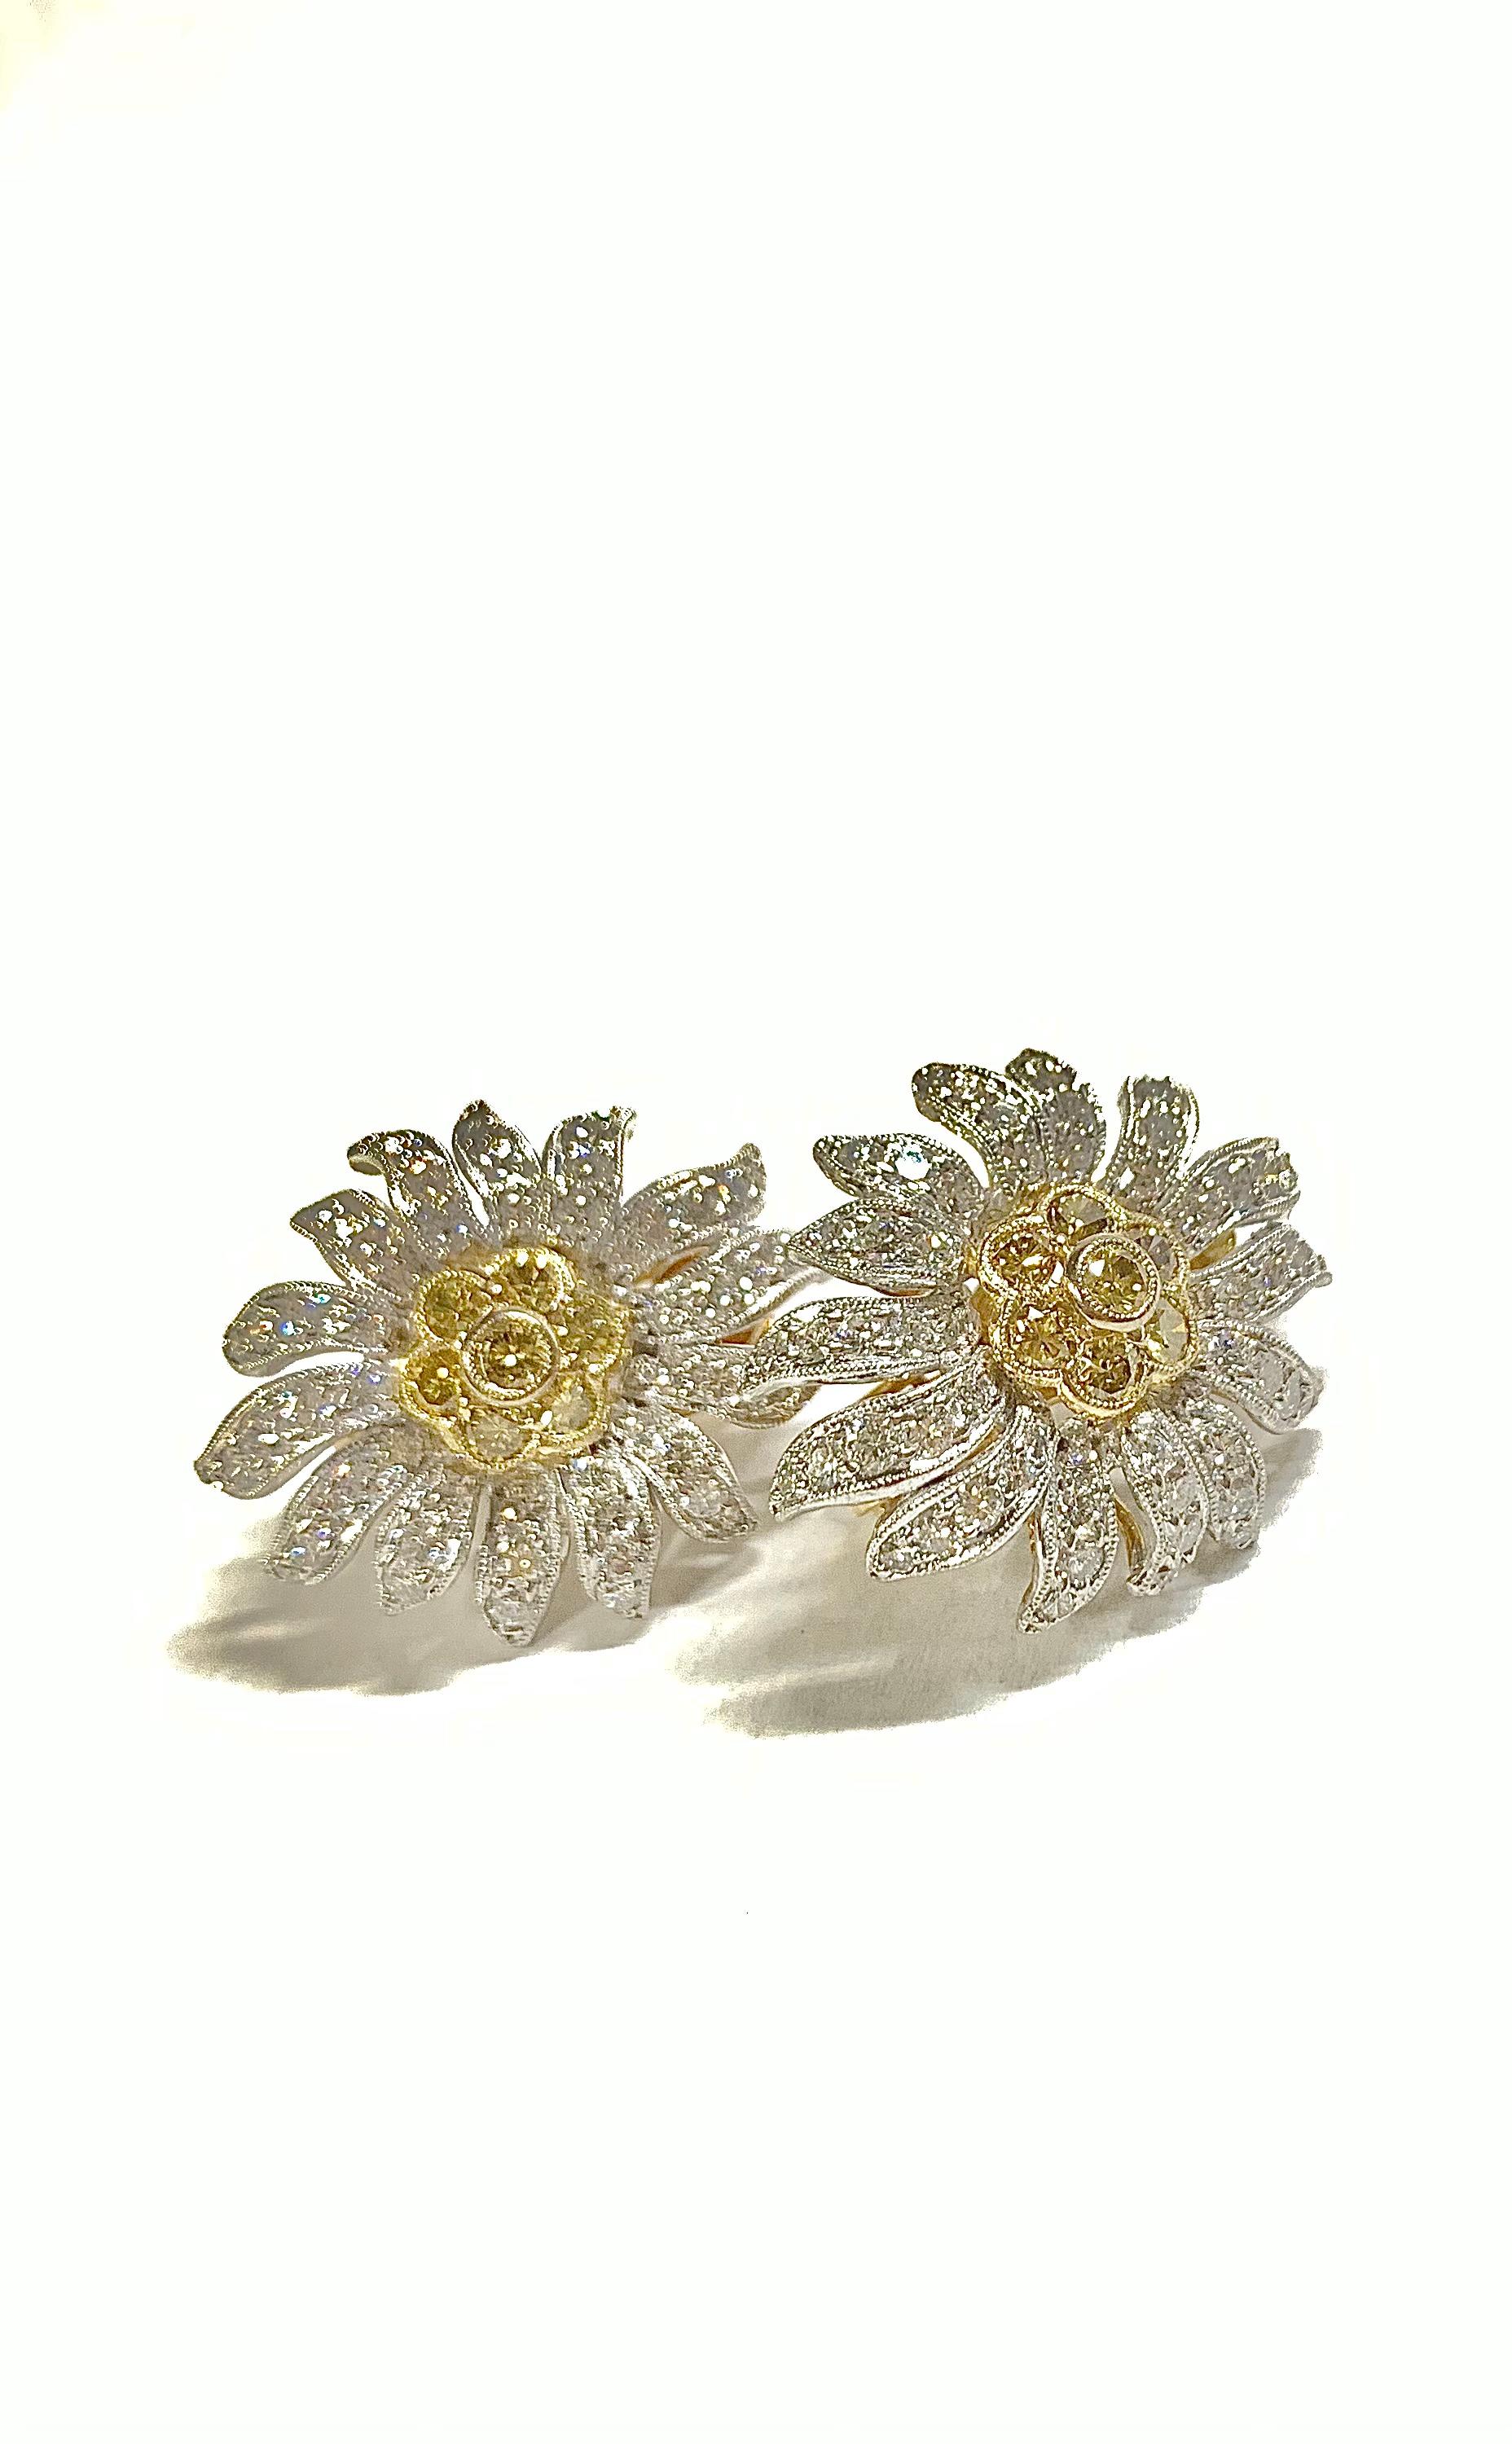 Beautiful Yellow and White Diamond Flower Earrings with a Beaded Edges in 18K Yellow Gold 

Stones: Yellow Diamonds 
Stone Shape: Round
Stone Carat: 0.80 Carat
Stones: Diamonds 
Stone Shape: Round  
Stone Weight: 2.00 Carat 
Material: 18K Yellow